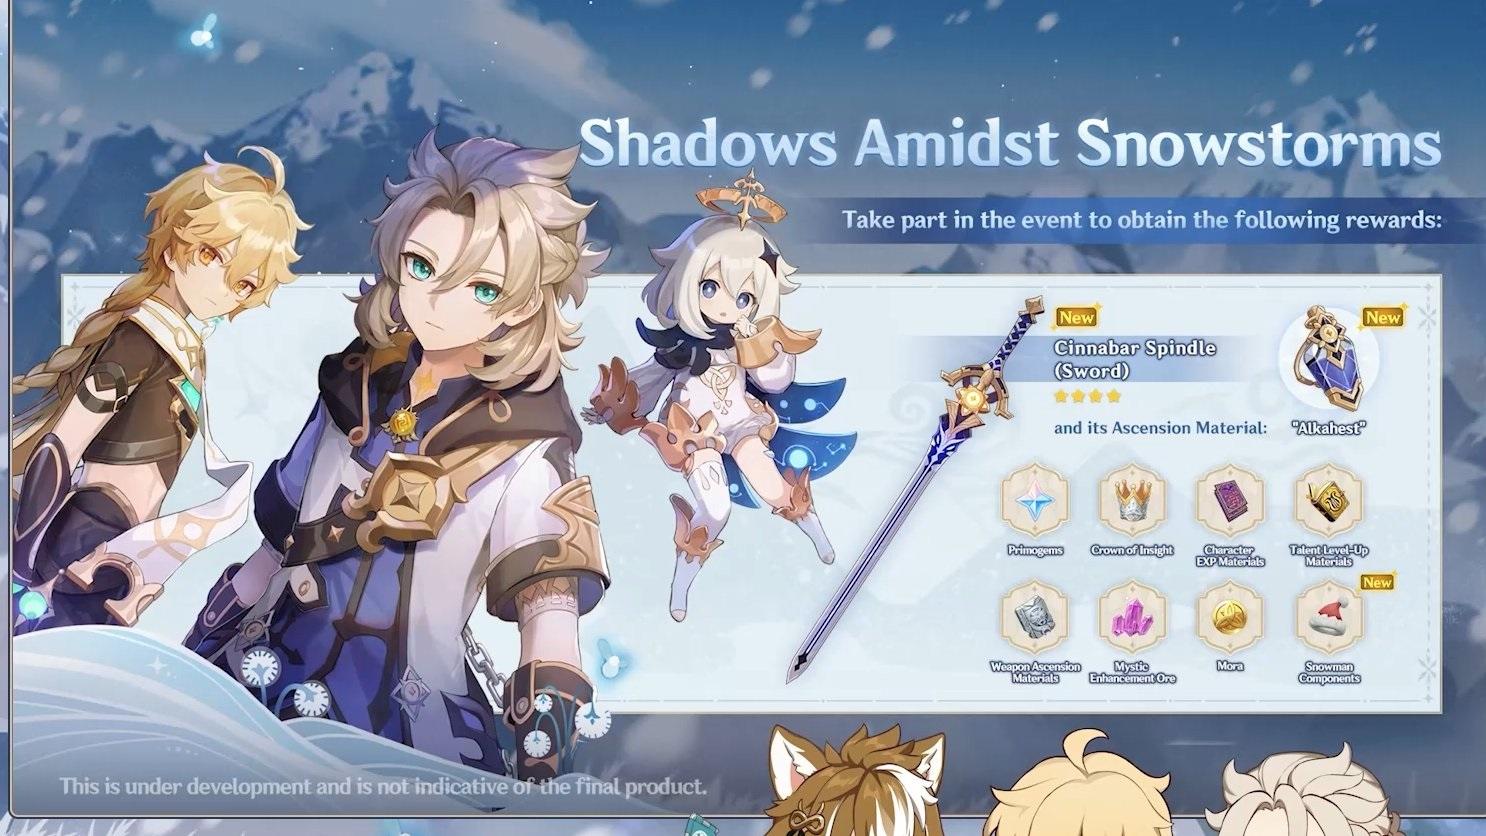 Shadow Amidst the Snowstorms event rewards